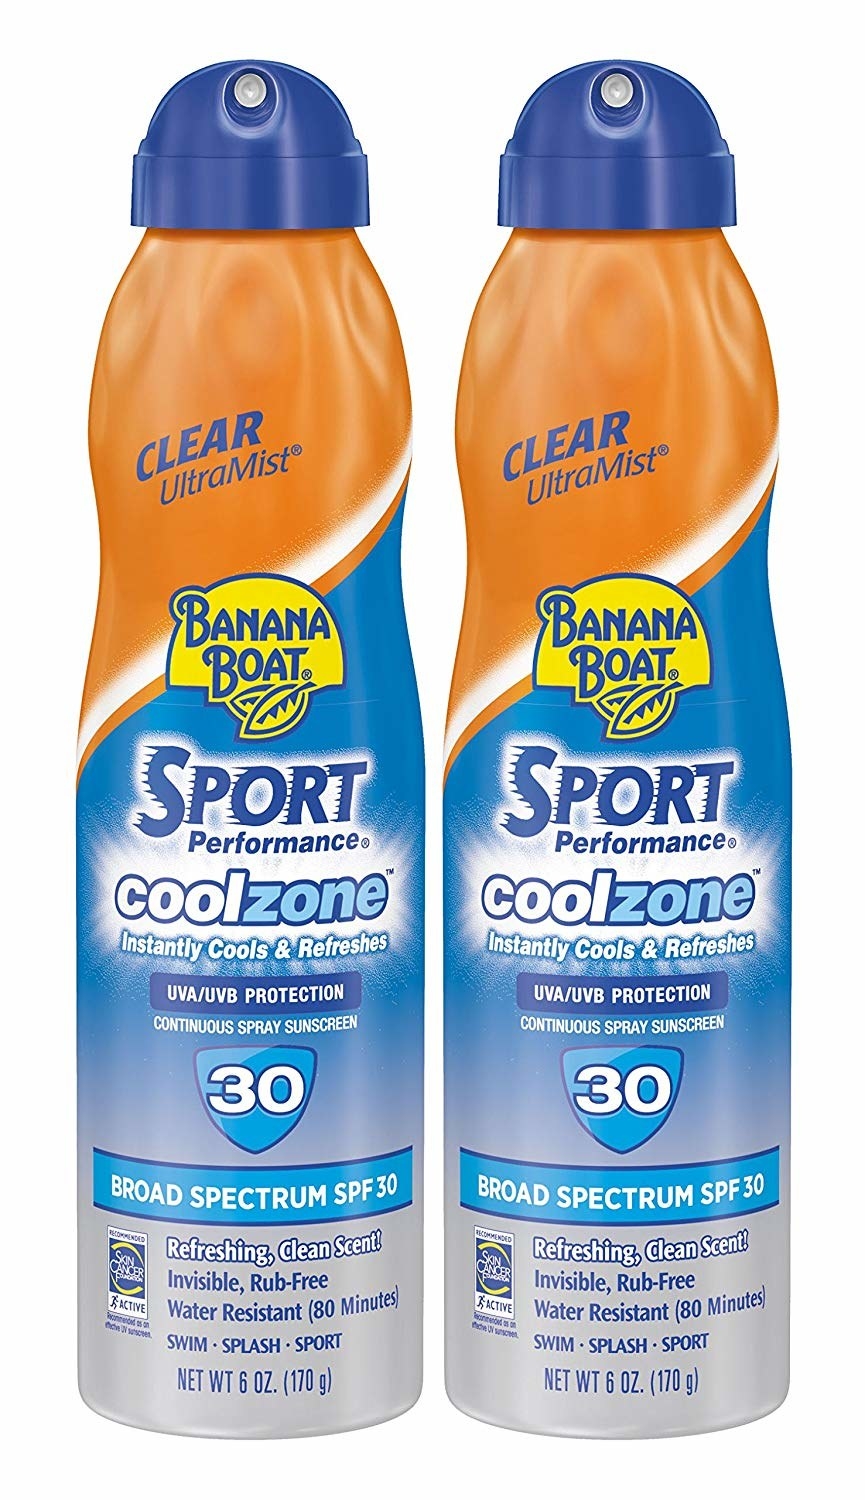 The two pack of sunscreen